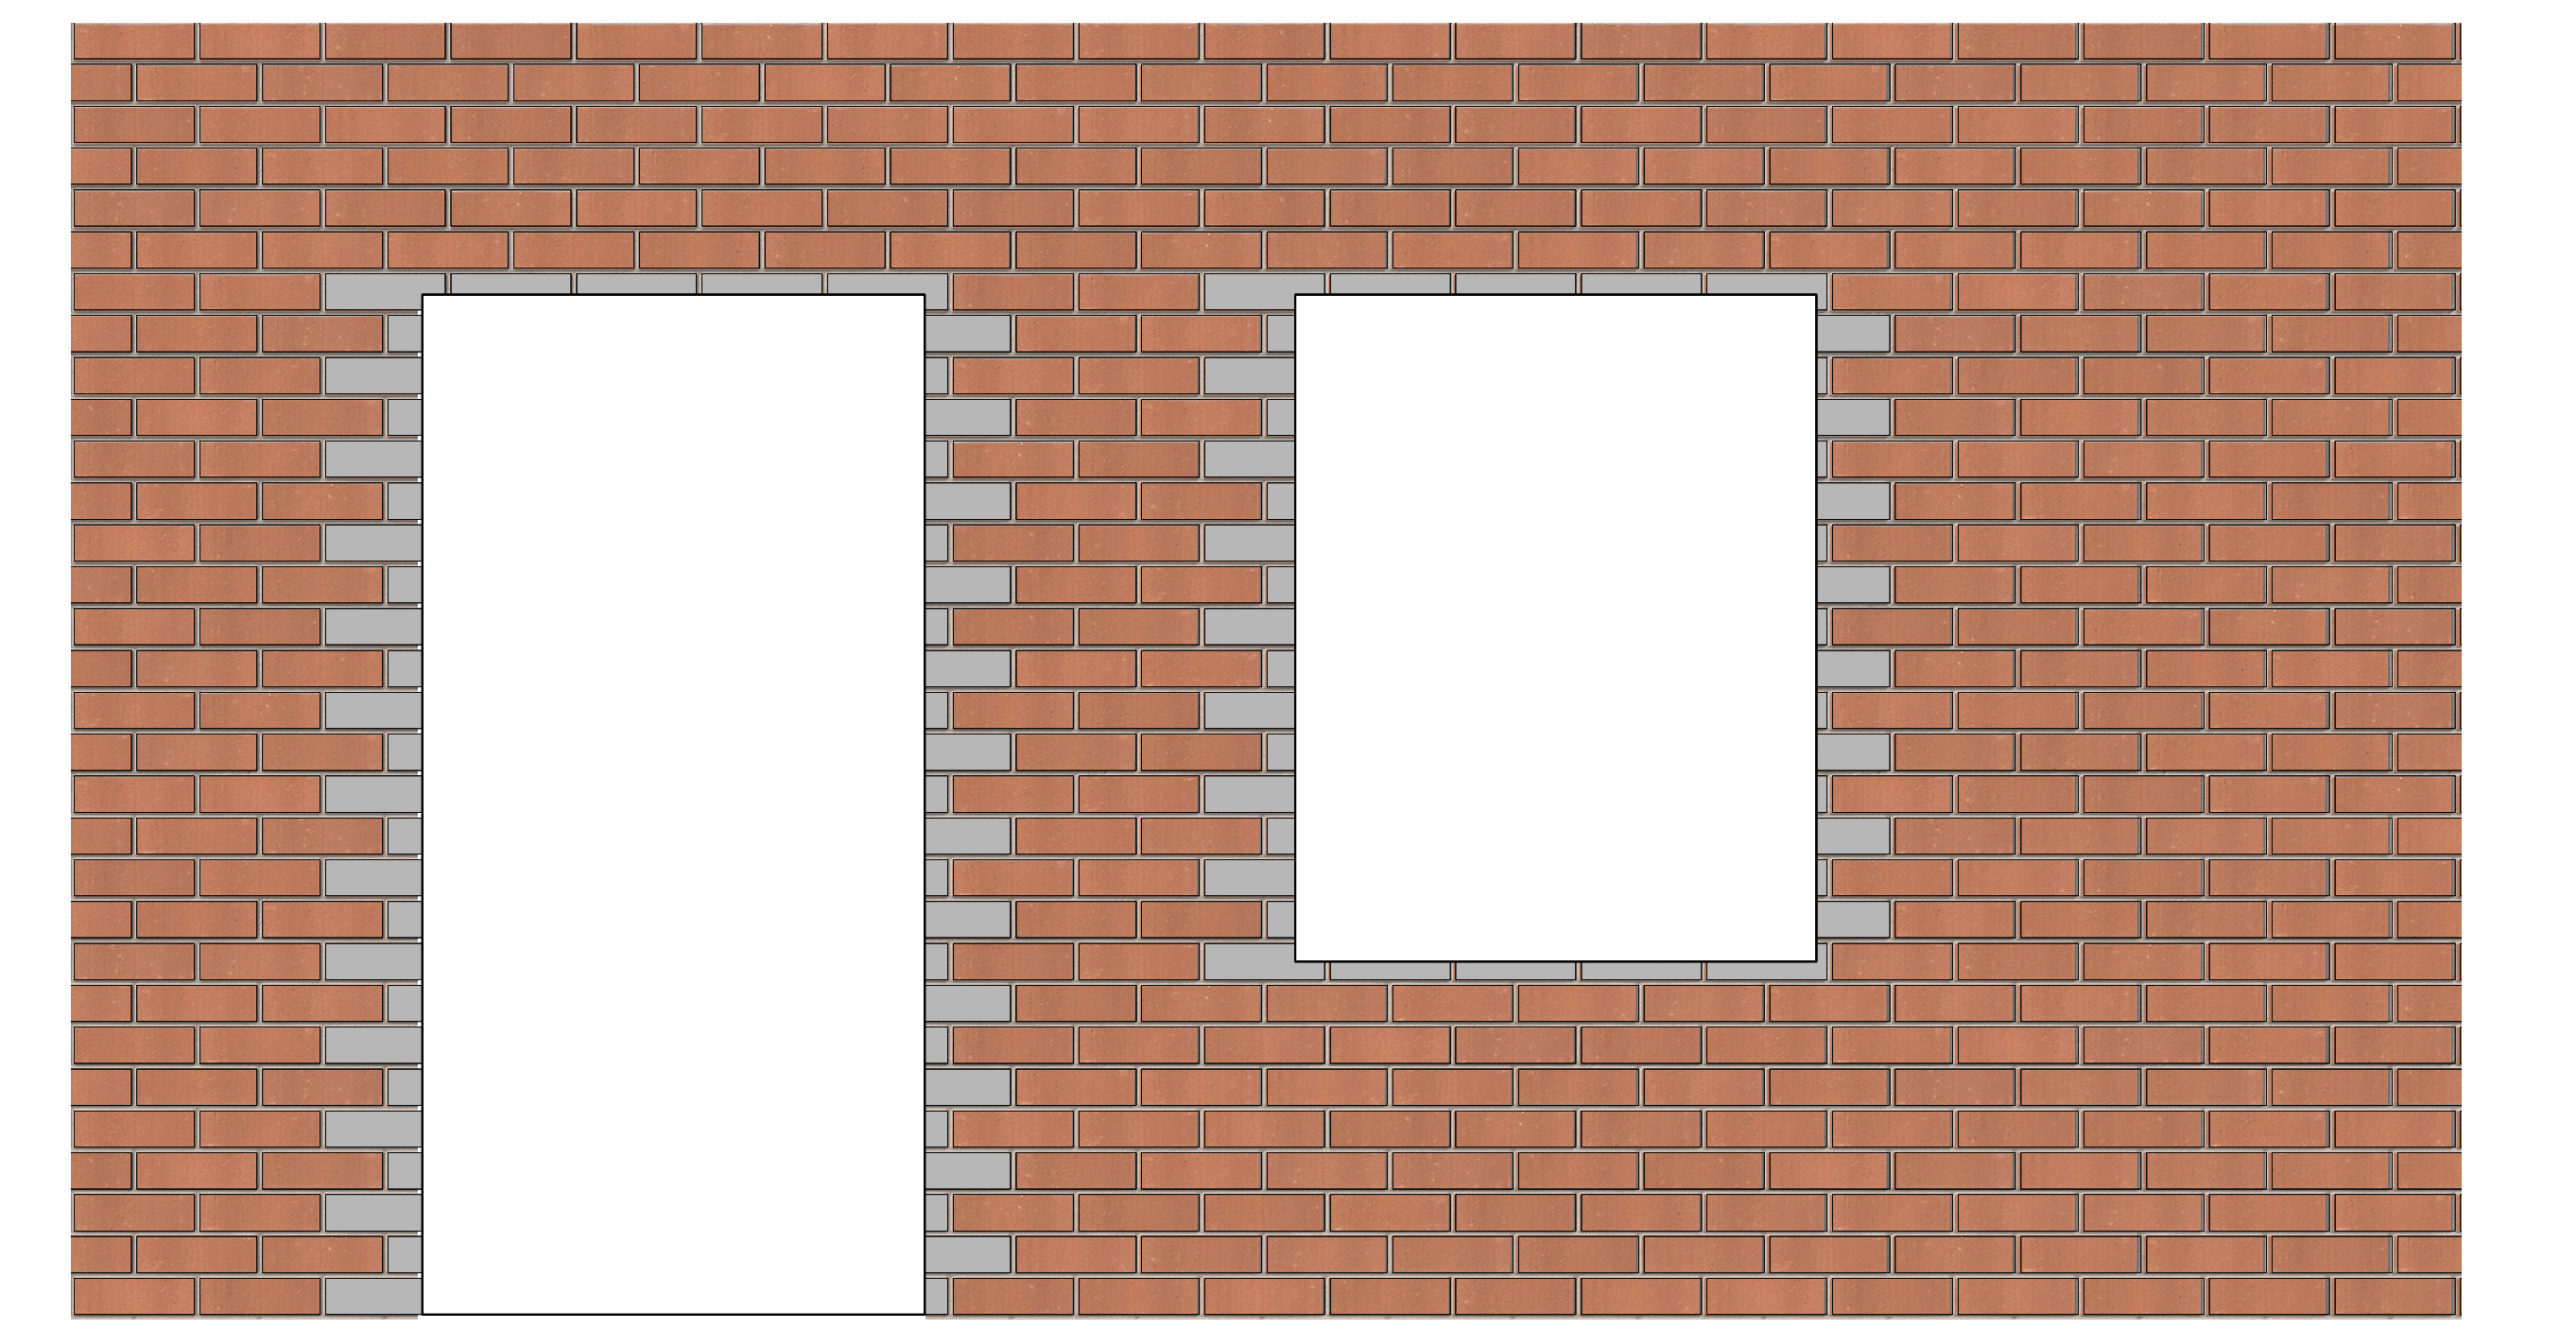 How to build a brick wall in a construction site - step by step